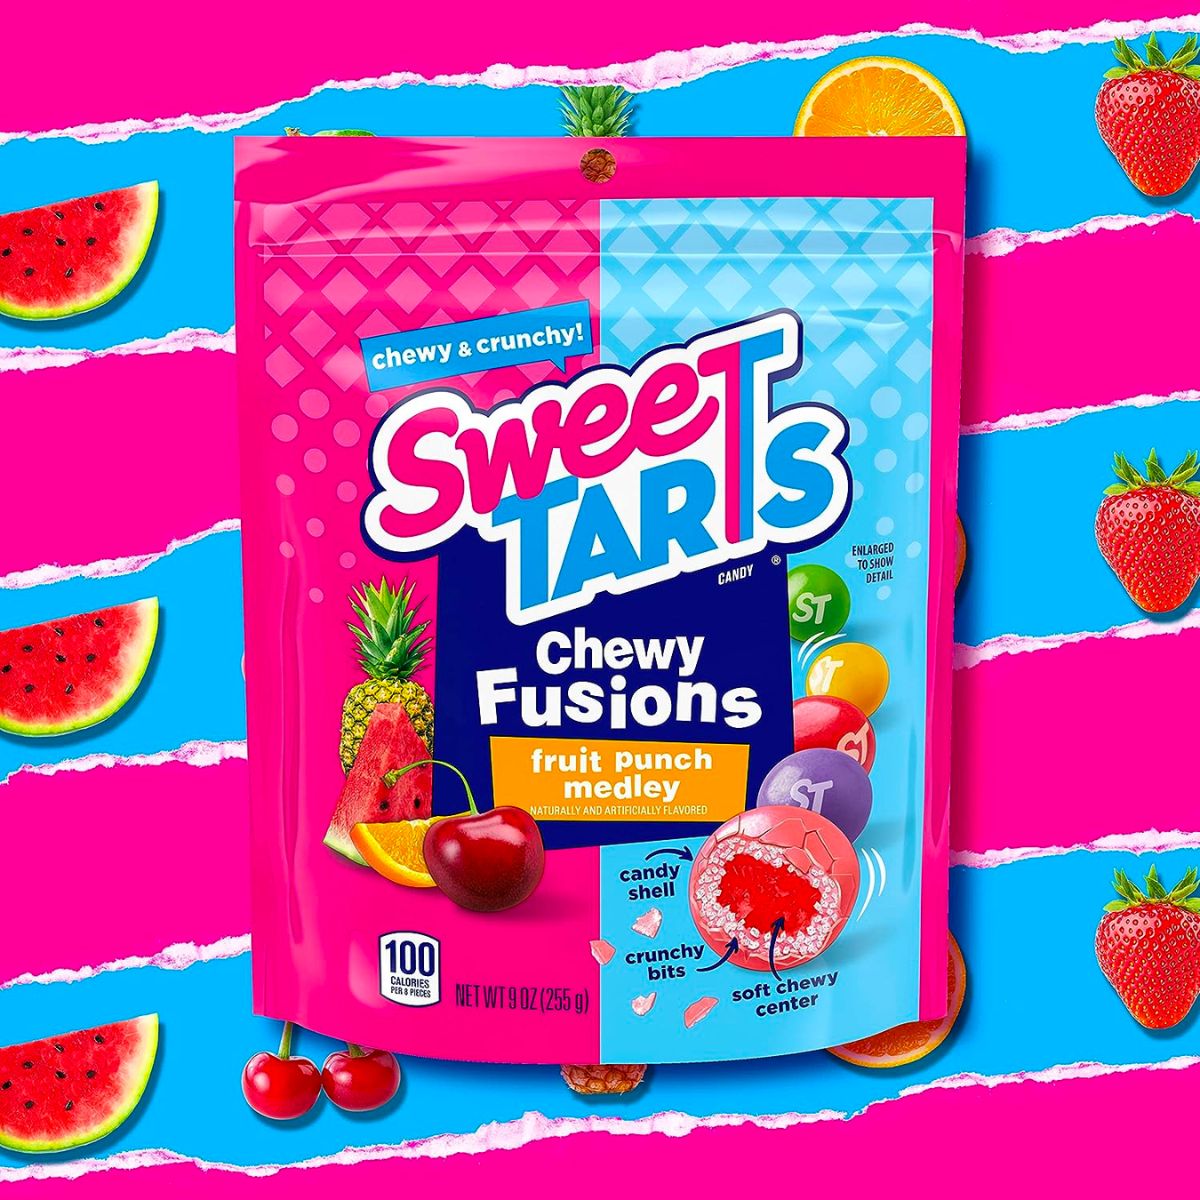 SweeTARTS Chewy Fusions, Fruit Punch Medley 9oz stock image